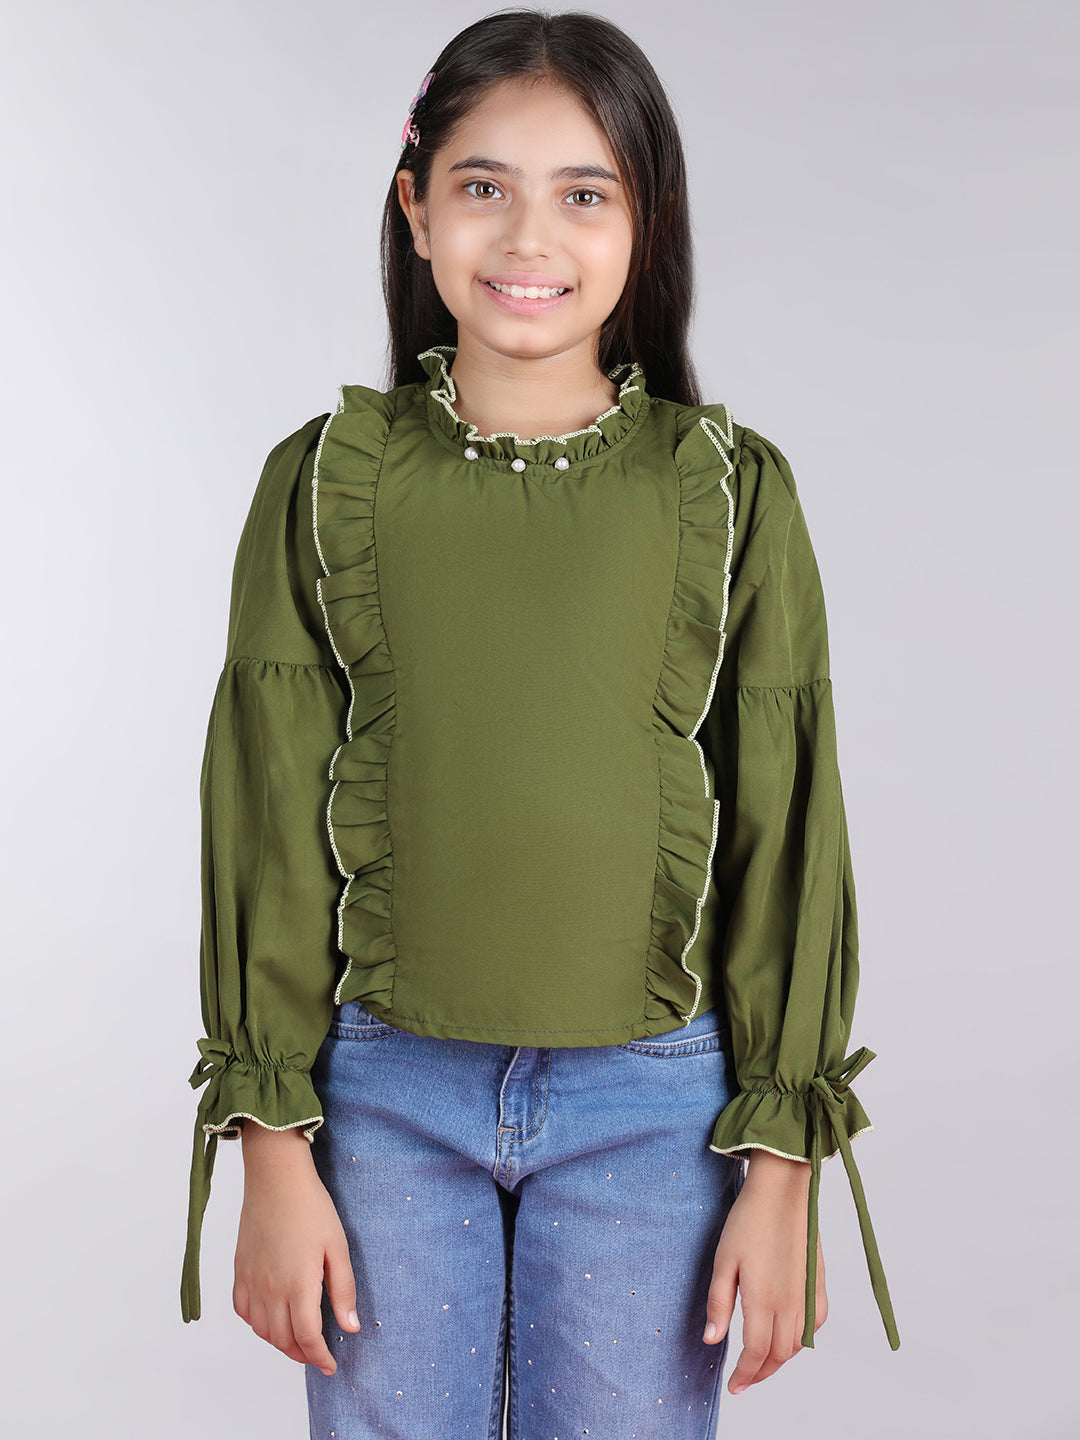 Cutiekins Solid Full Sleeves Polyester Tops-Green & White